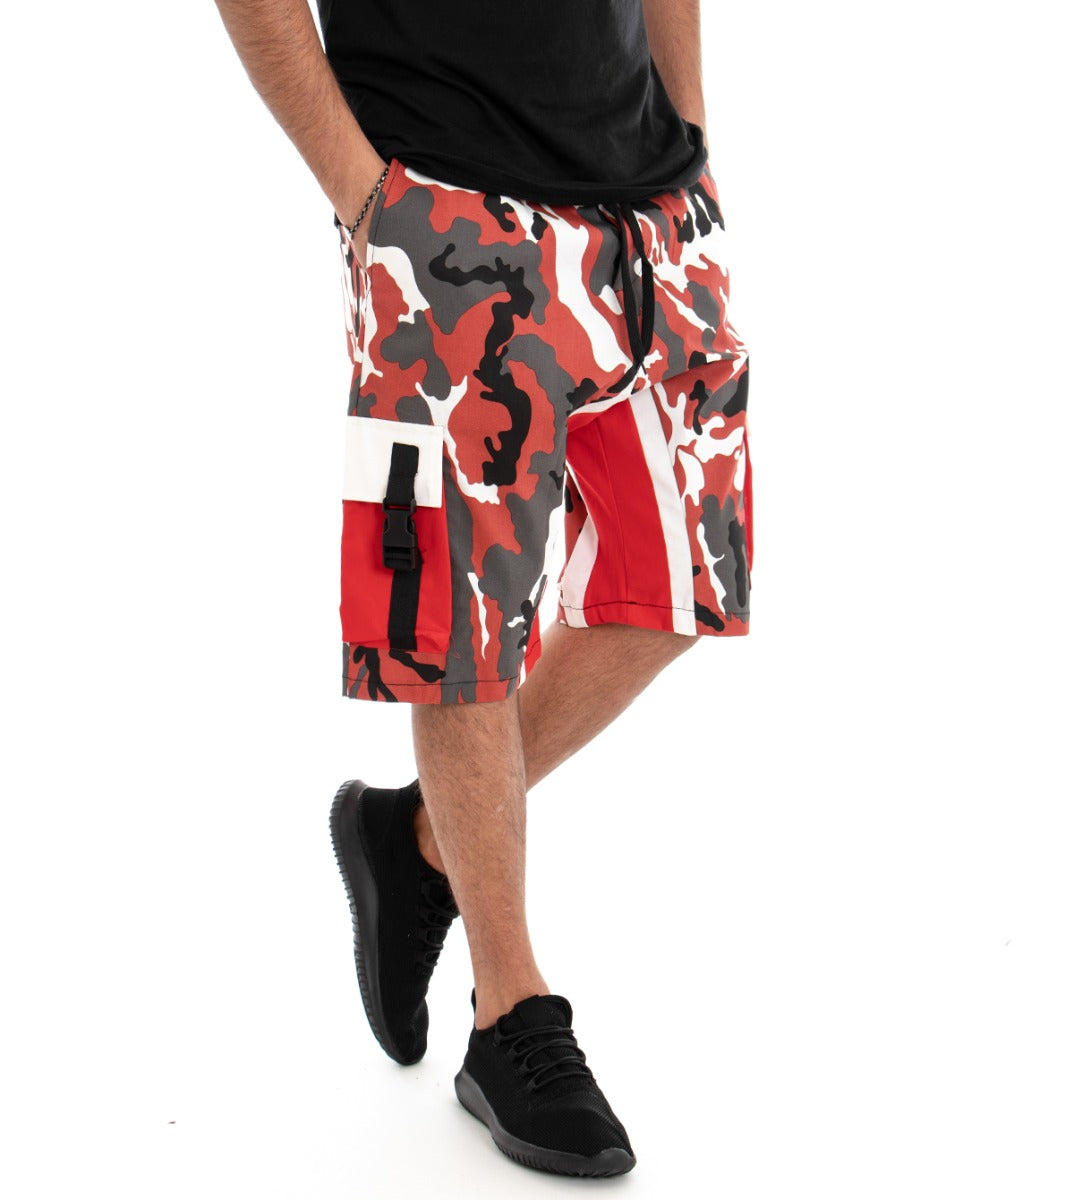 Bermuda Shorts Men's Camouflage Pattern Red Elastic GIOSAL-PC1381A